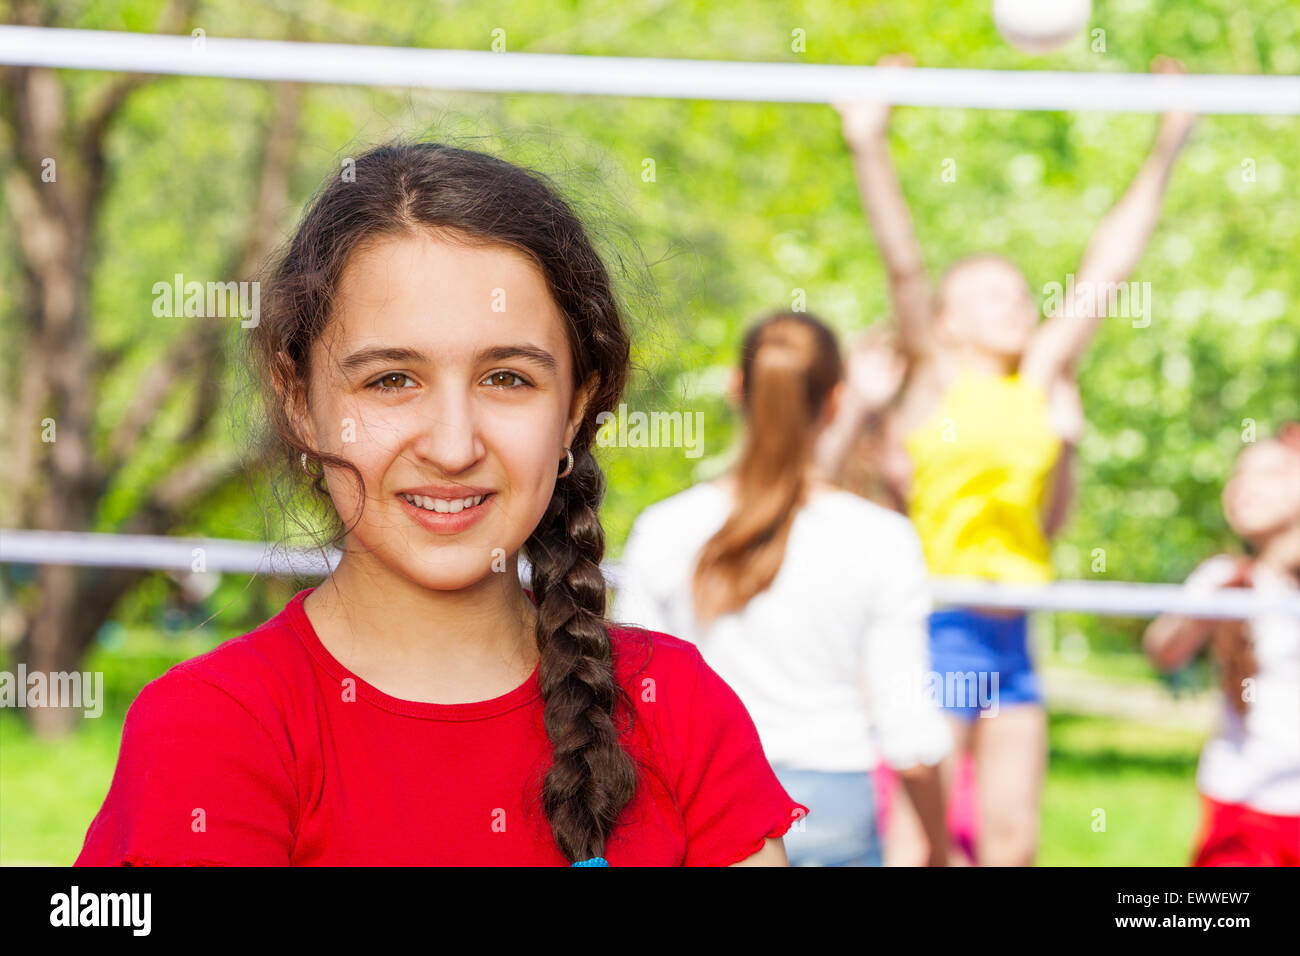 Middle Eastern teen girl during volleyball game Stock Photo